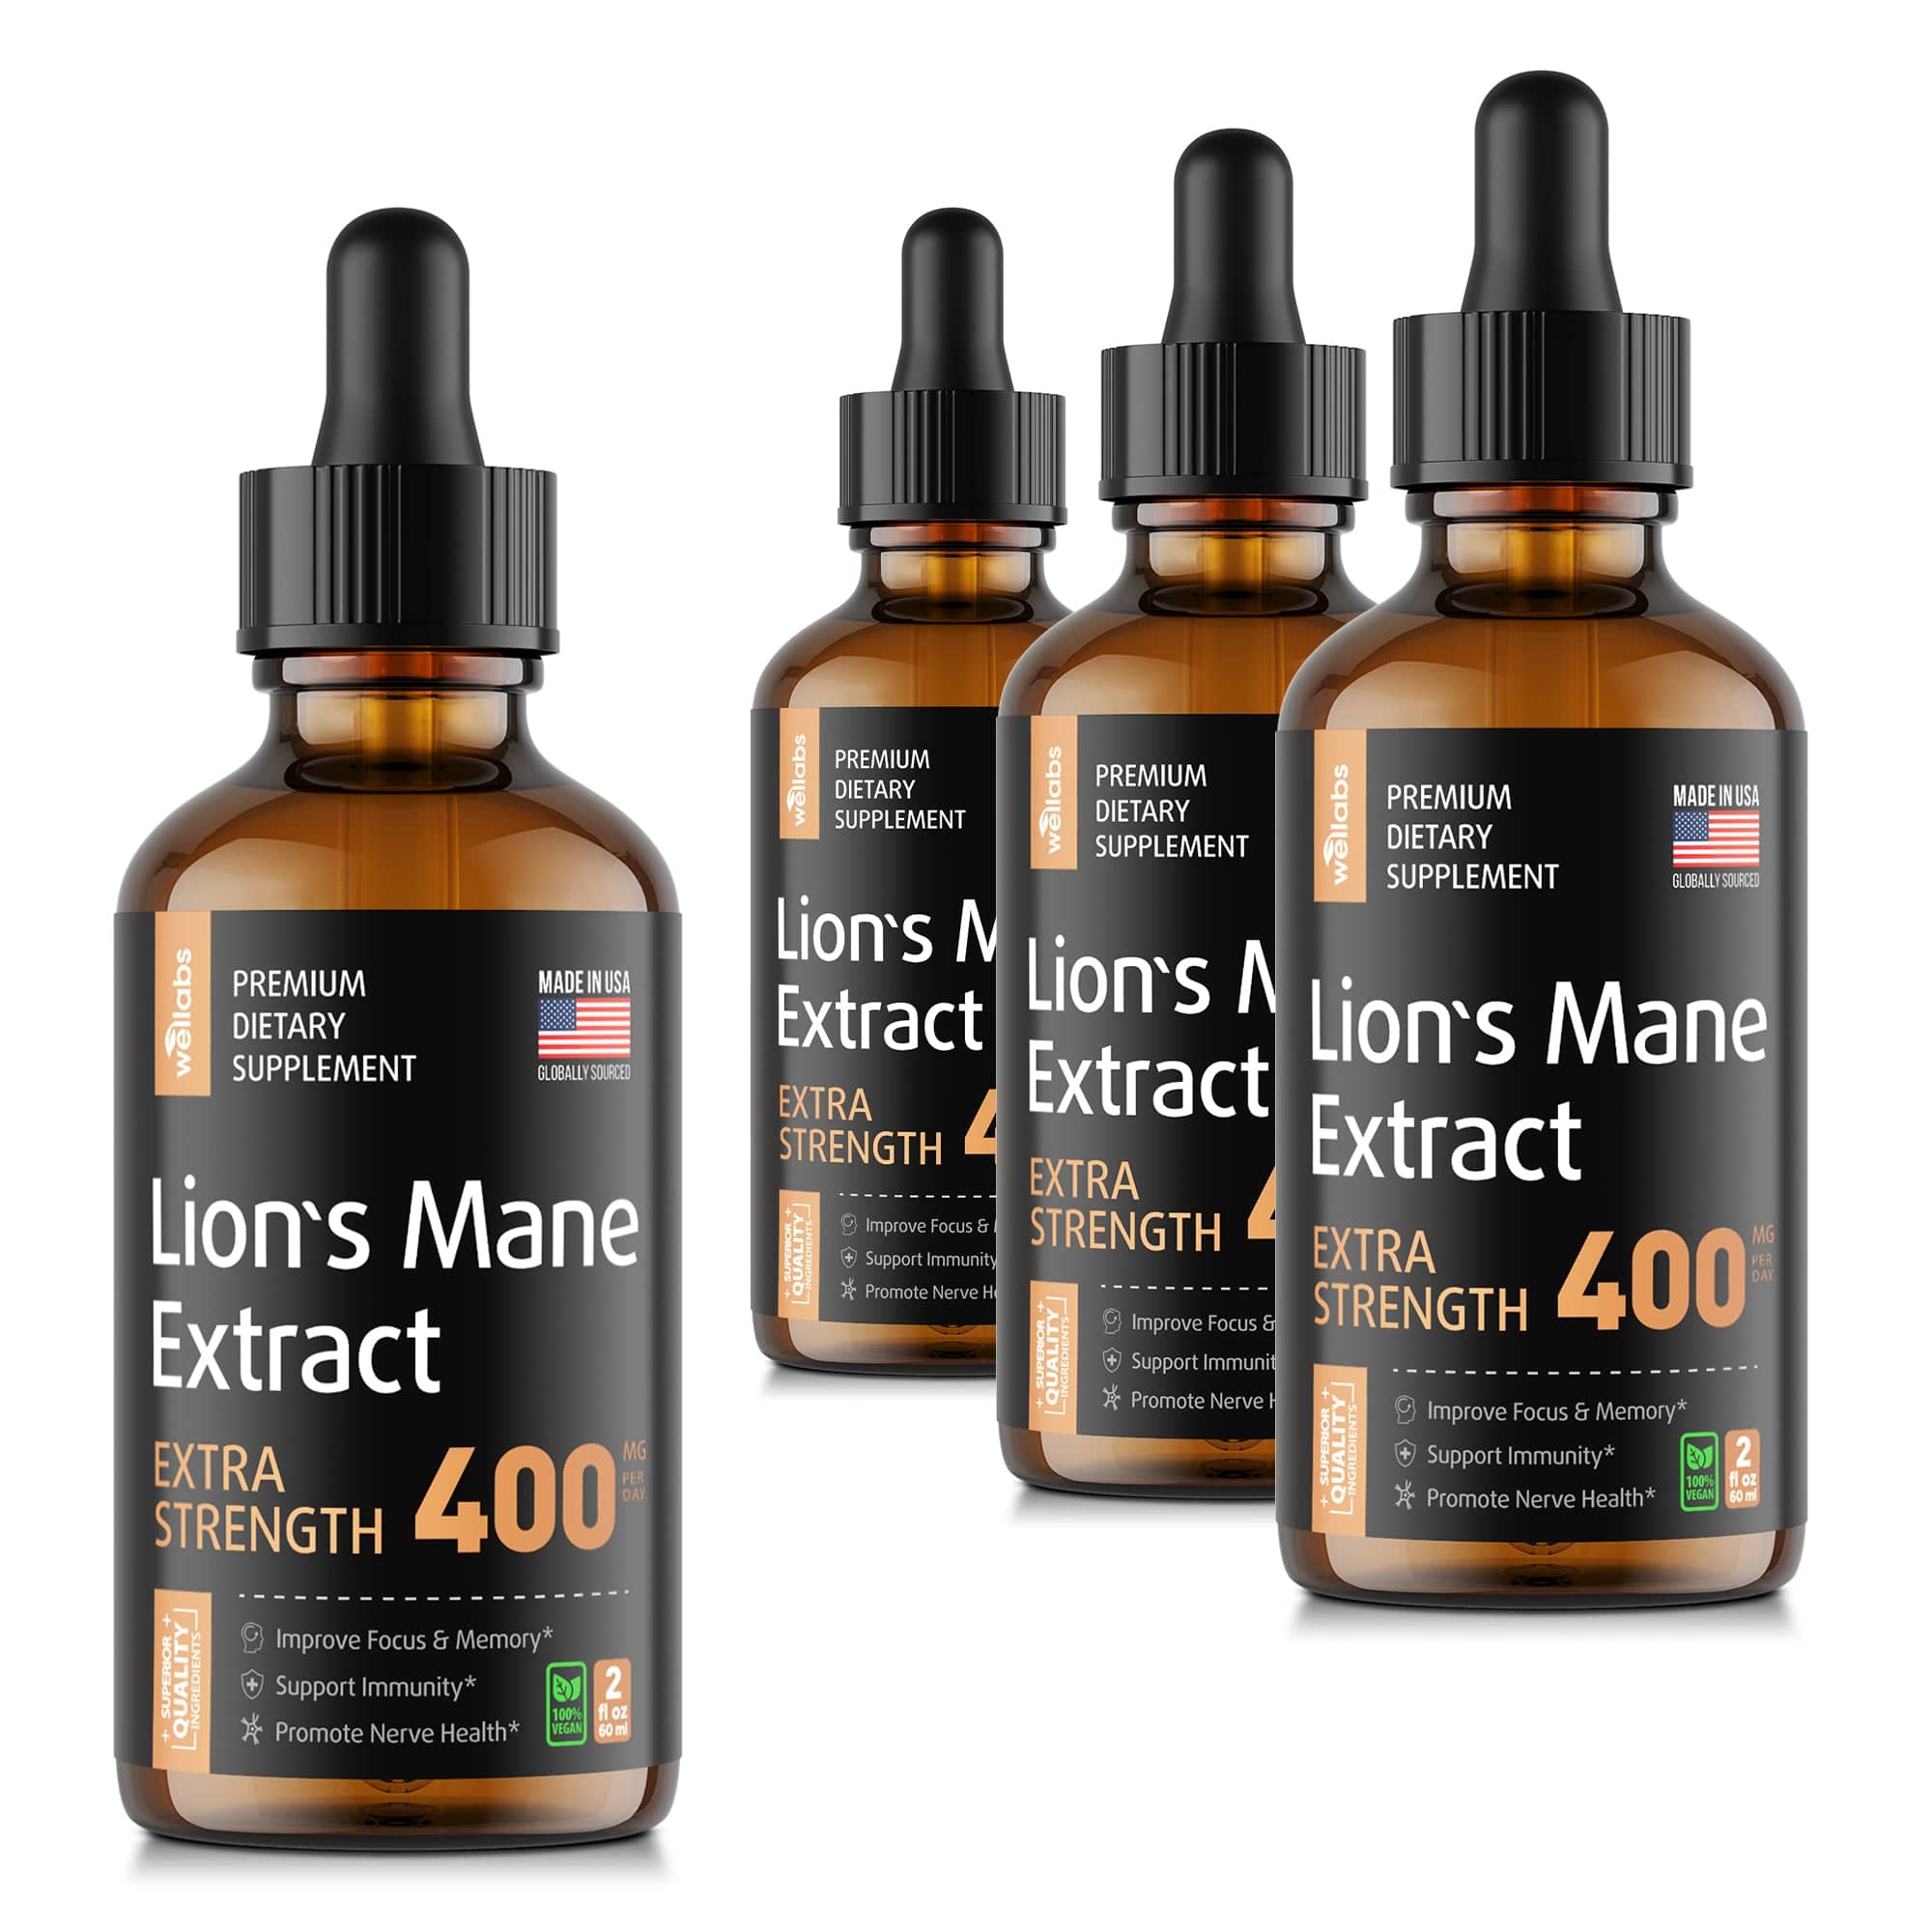 Lion's Mane Extract - Buy 3 Get 1 Free